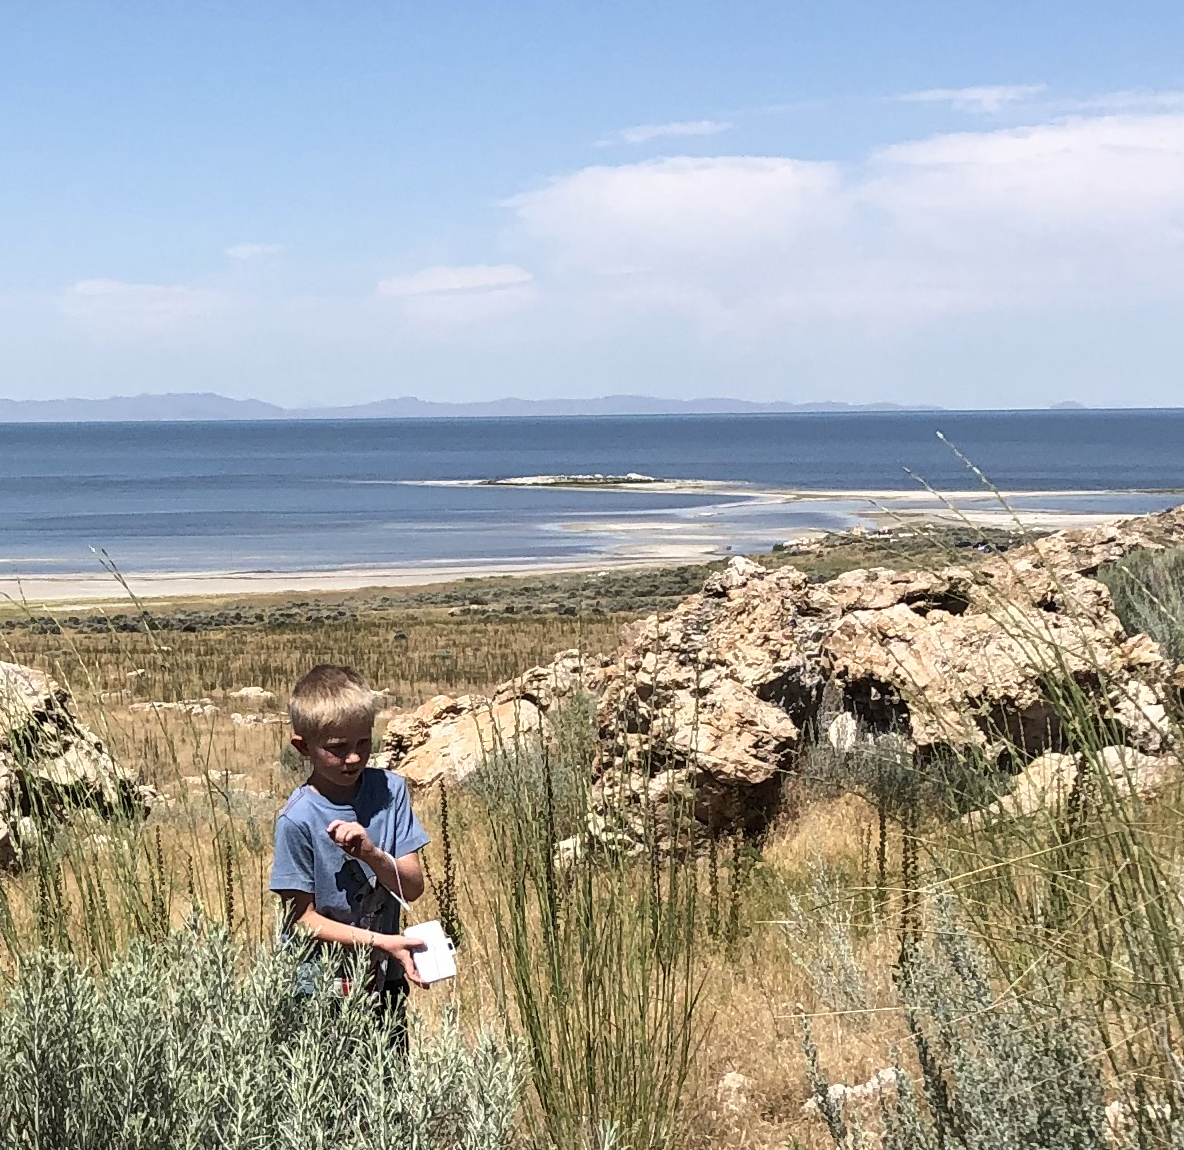 A blond boy in a blue t-shirt, about first grade aged, walks in tall grass and sage, the Great Salt Lake is in the background, the sky with fluffy white clouds fills the top half of the frame